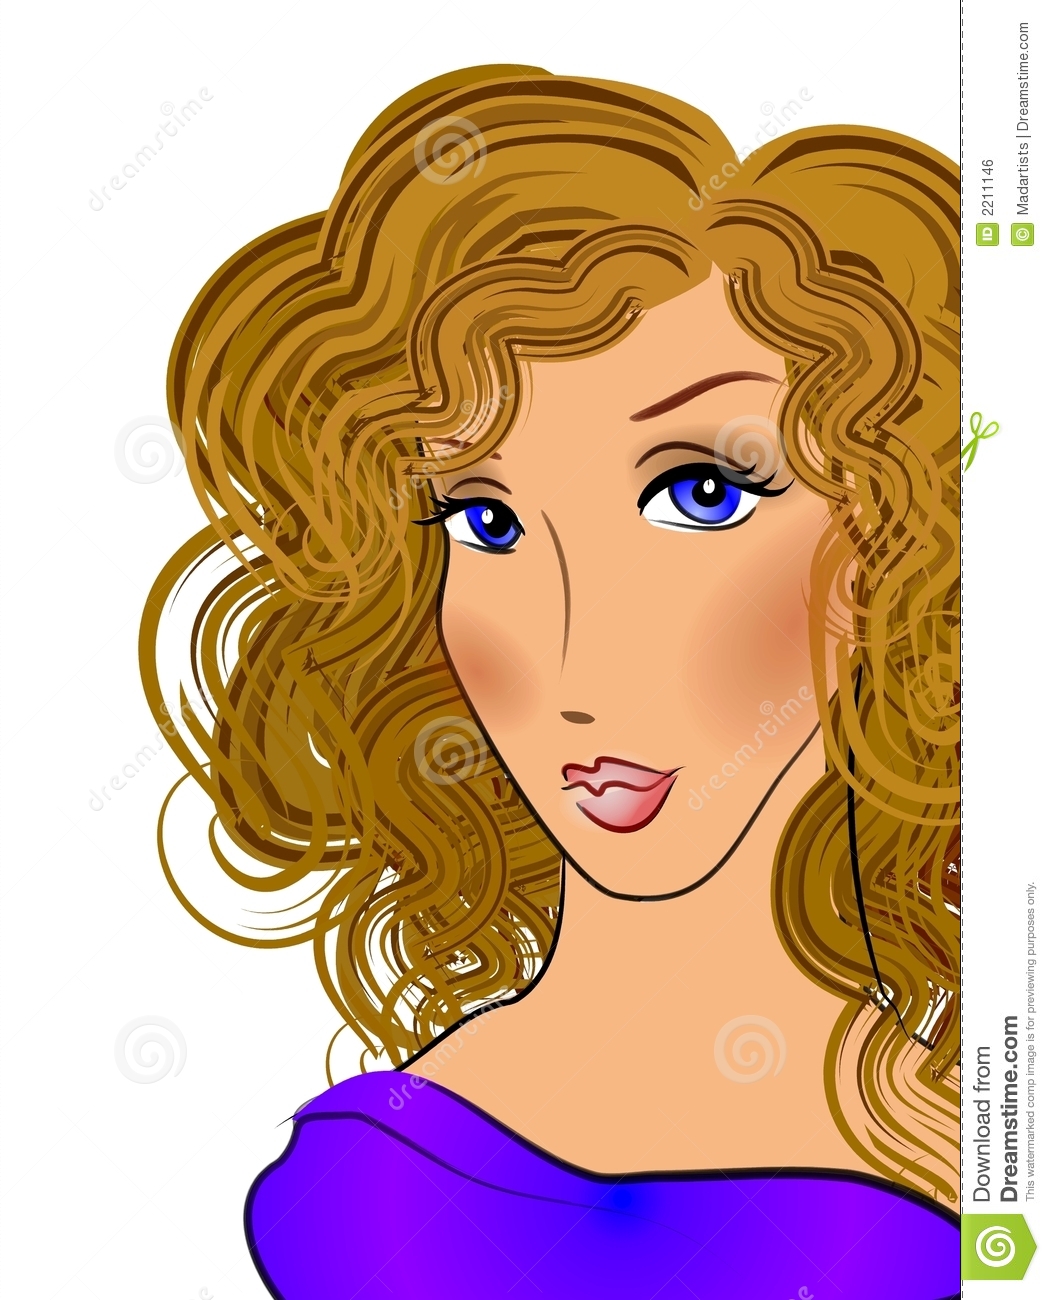 An Illustration Of A Young Woman With Brown Curly Hair And Blue Eyes